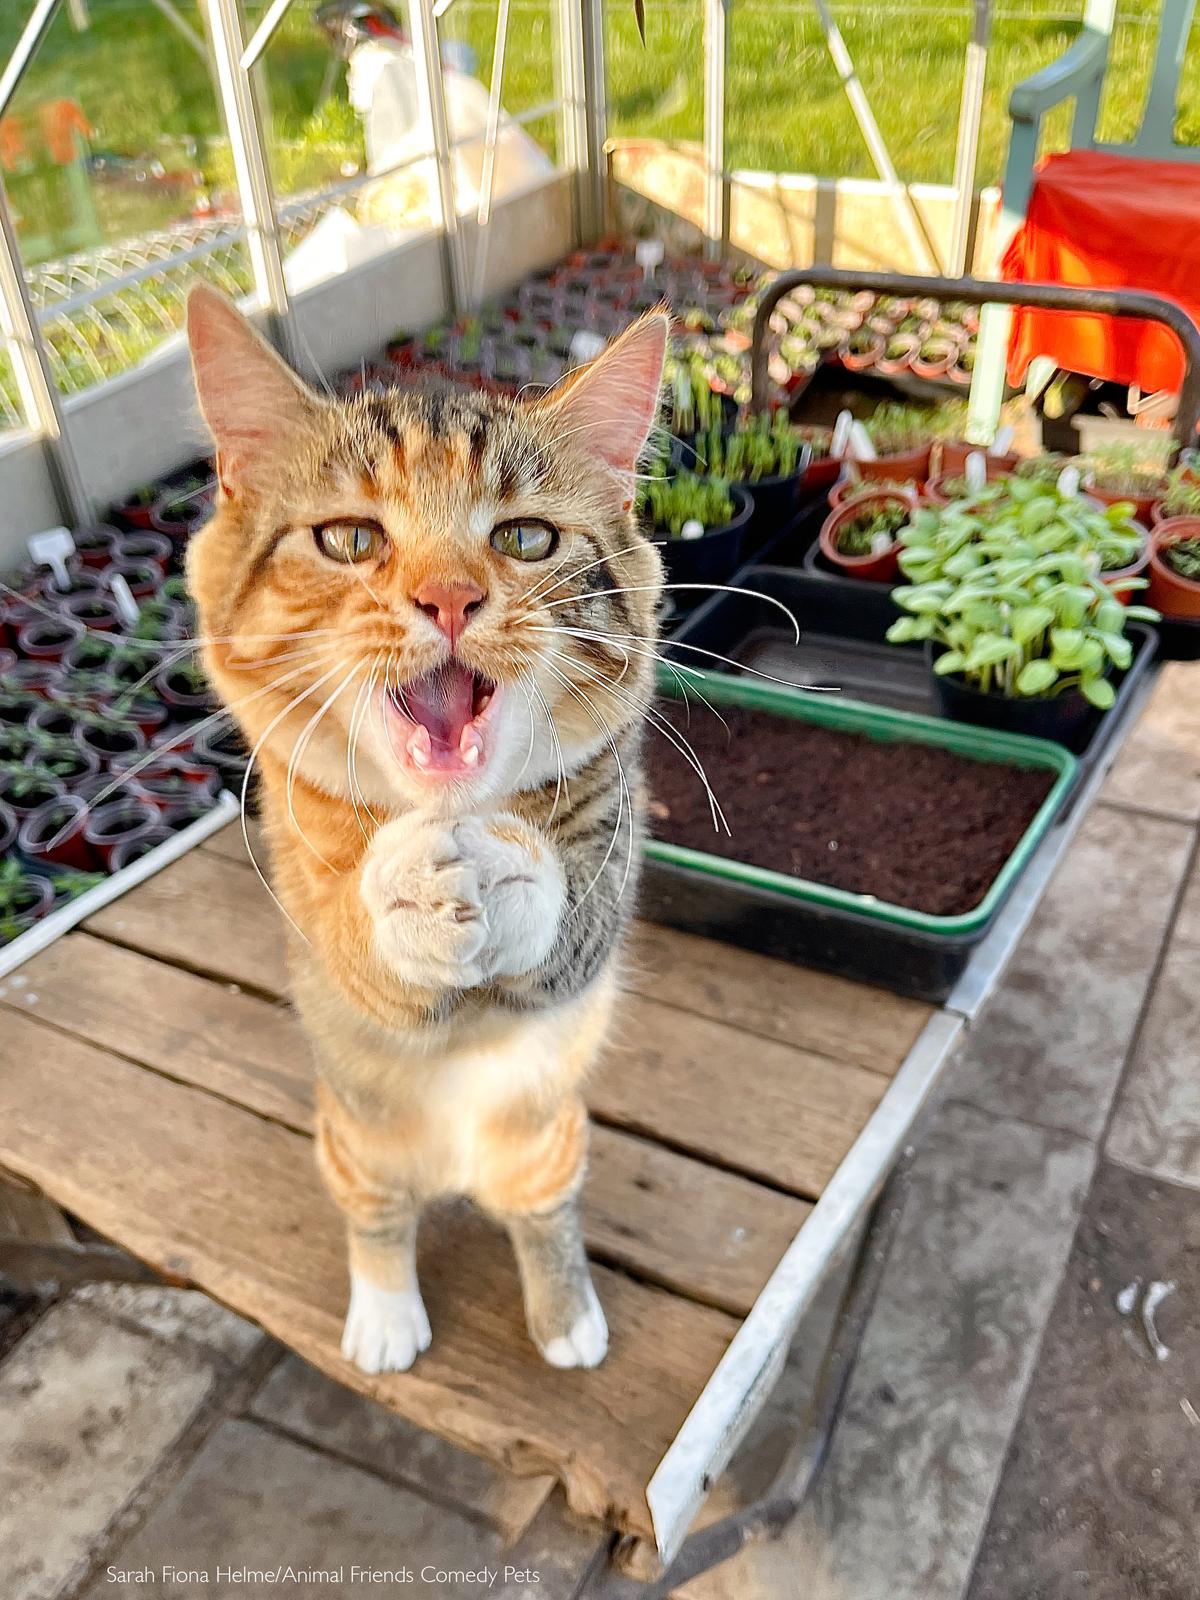 "Rosie was helping me in the greenhouse and decided to try, in her most engaging way, (and with the help of the wheelbarrow to stand on), to persuade me into giving her some of her favorite treats—which, being a lowly cat servant with no willpower, I did!" (Courtesy of Sarah Fiona Helme/<a href="https://www.facebook.com/AnimalFriendsPetInsurance">Animal Friends Comedy Pets</a>)